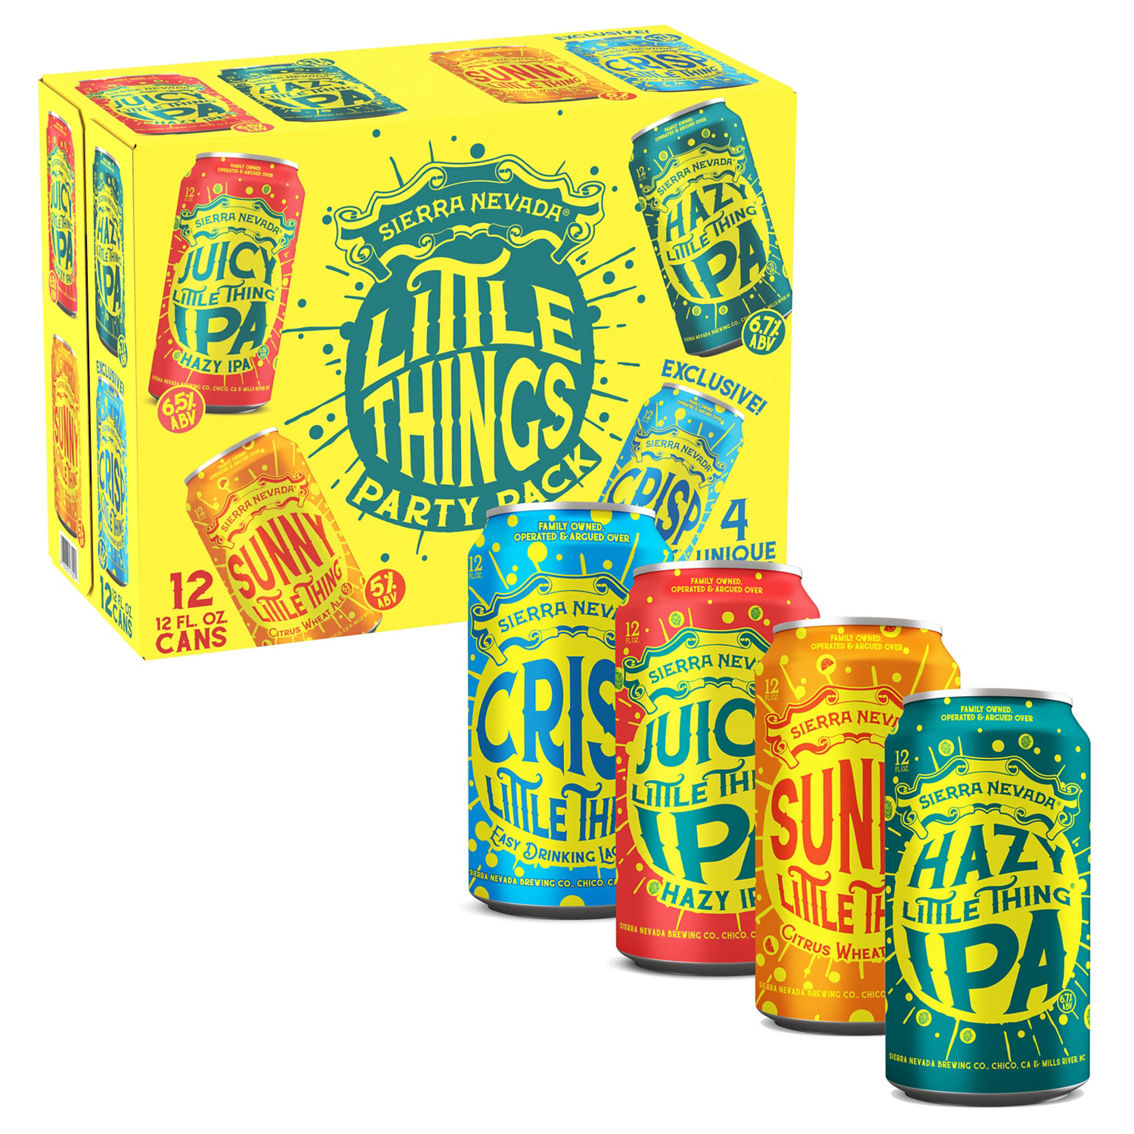 Sierra Nevada Little Things Party Pack, 12 oz. Cans, 12 pk.